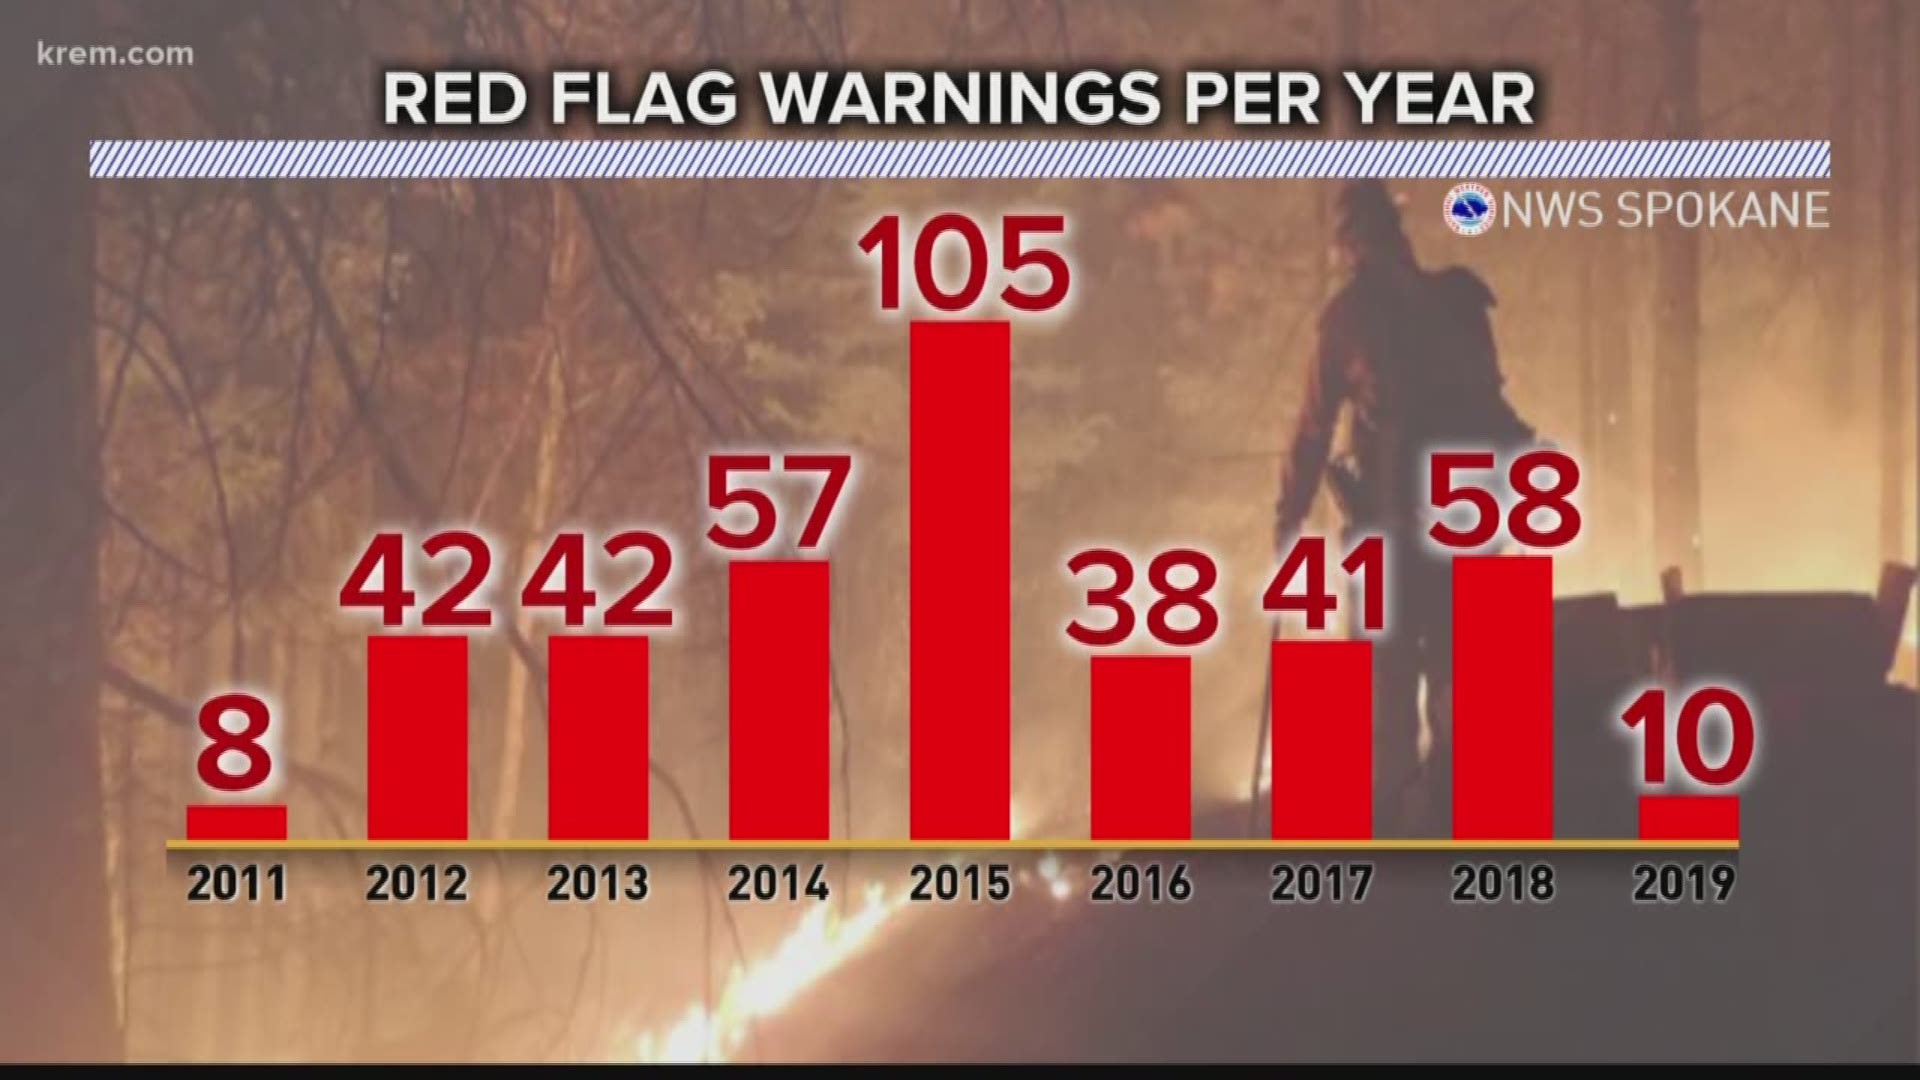 Despite conditions tonight.. So far this year, we haven't seen that many Red Flag Warnings. We asked Meteorologist Thomas Patrick how unusual this is and if it's a indication of how the rest of the summer will play out.